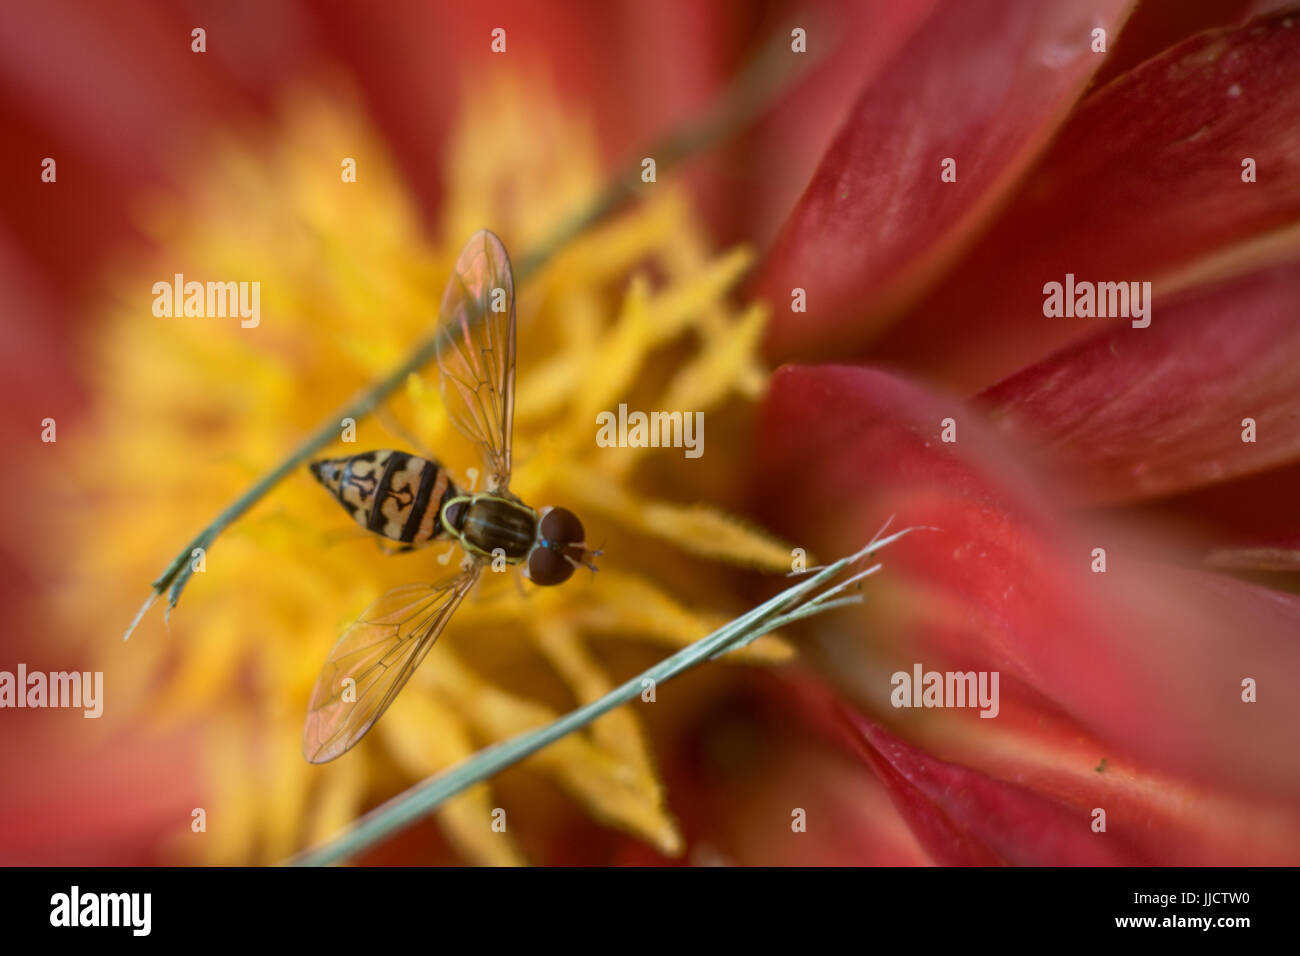 Hoverfly on Red Dahlia Stock Photo